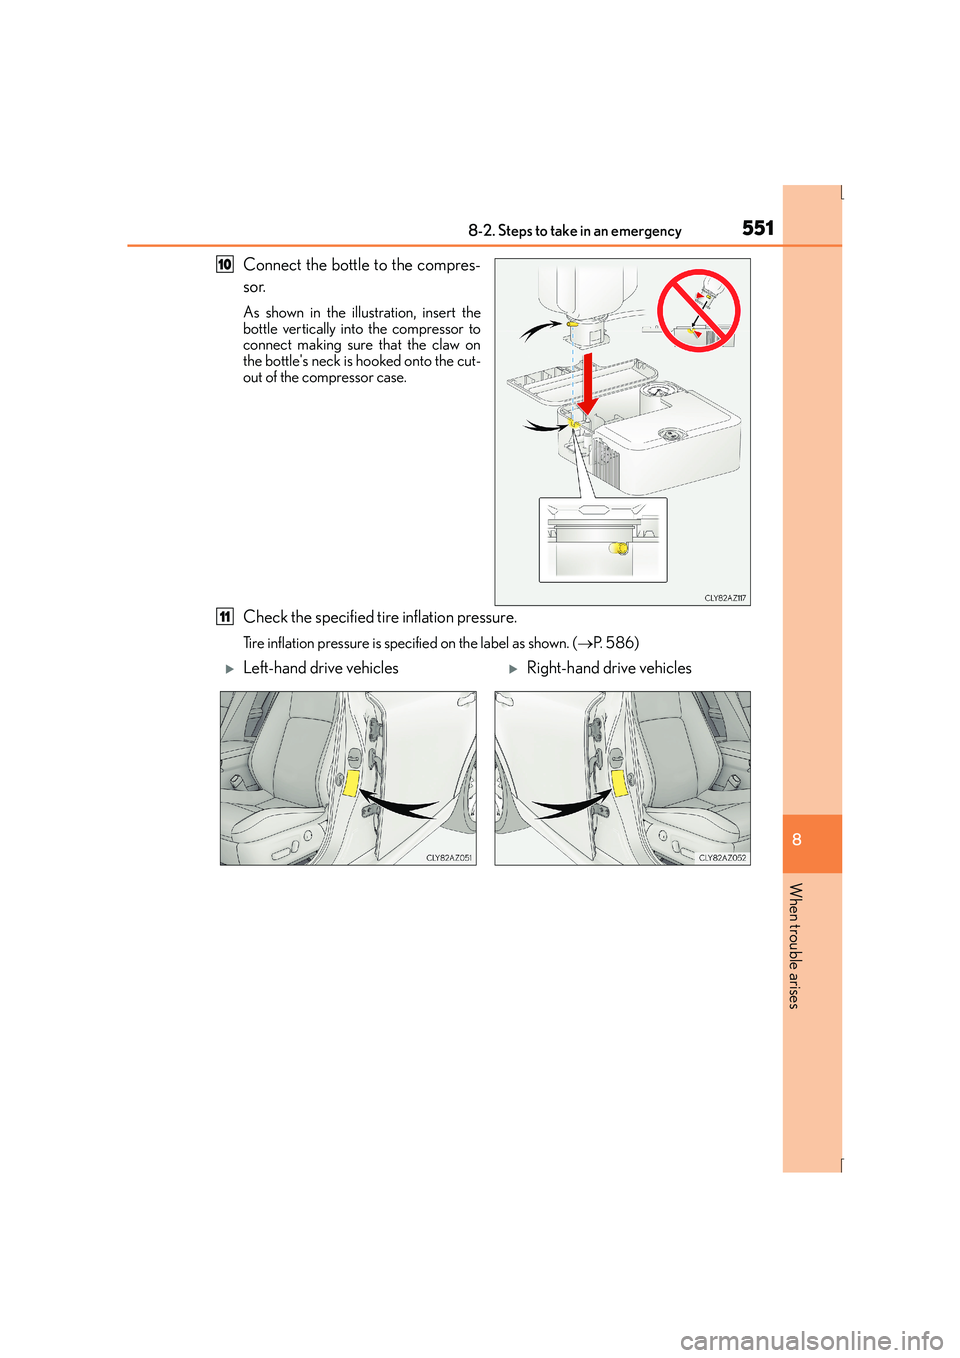 Lexus IS300h 2015 Owners Guide 5518-2. Steps to take in an emergency
8
When trouble arises
IS300h_EE(OM53D56E)
Connect the bottle to the compres-
sor.
As shown in the illustration, insert the
bottle vertically into the compressor t